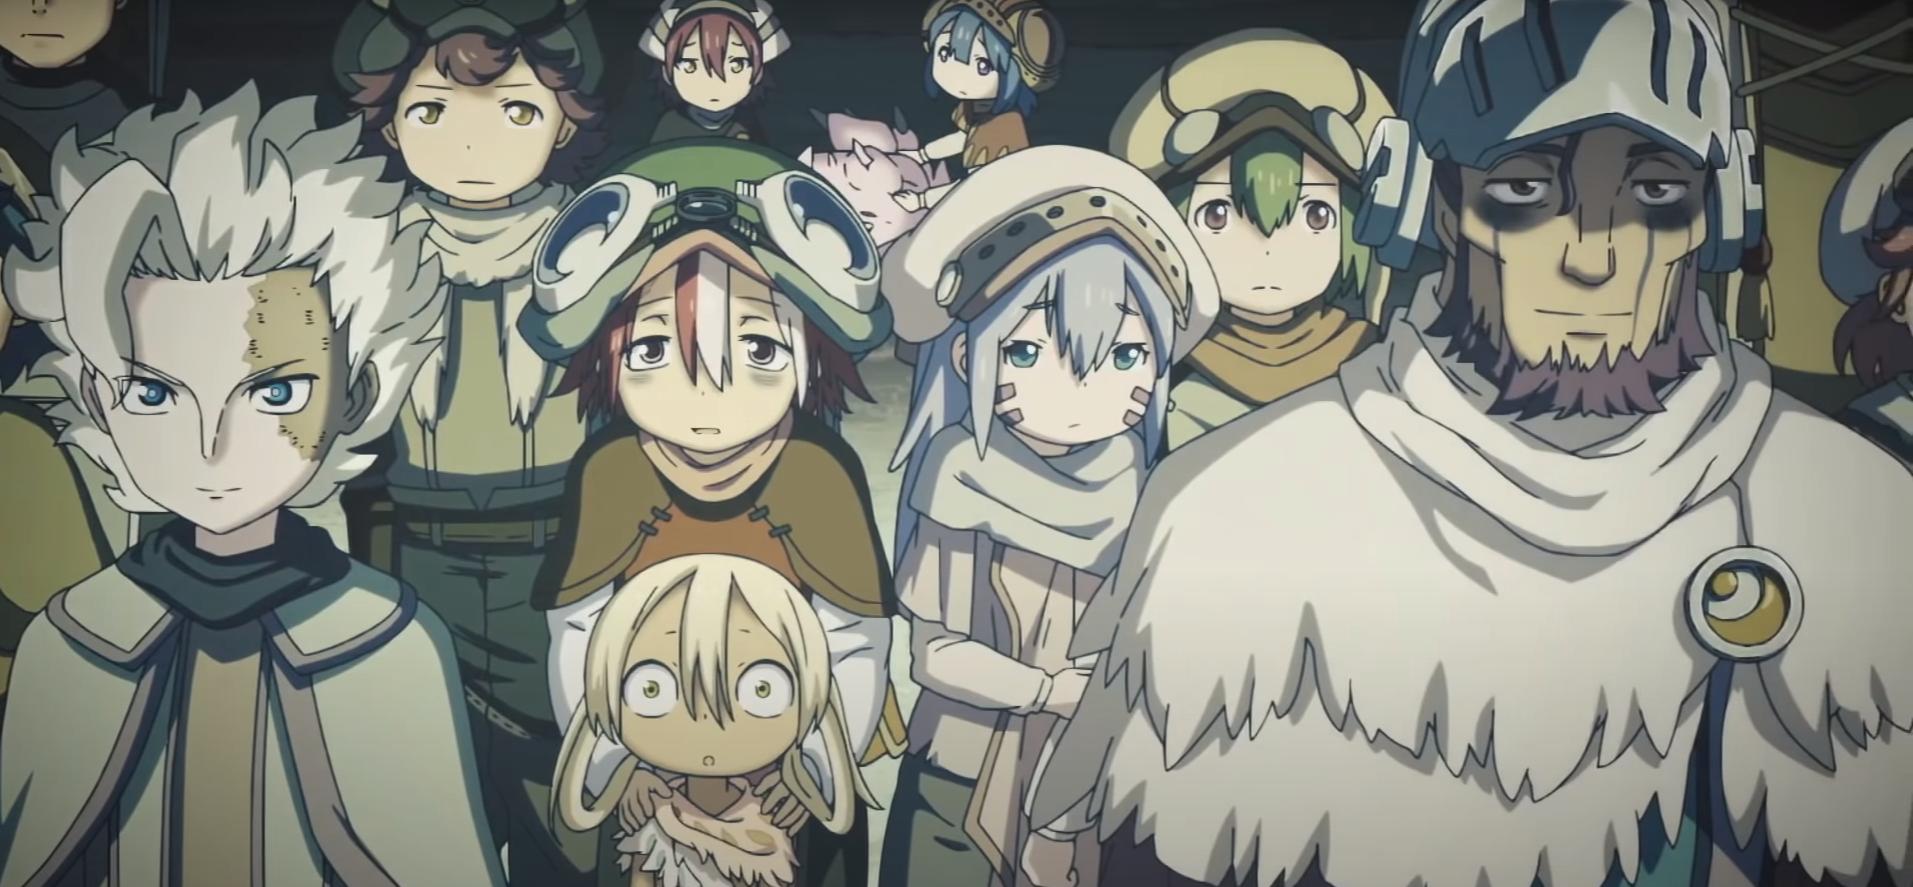 Made in abyss season 2 - the city of gold - scheduled for 2022